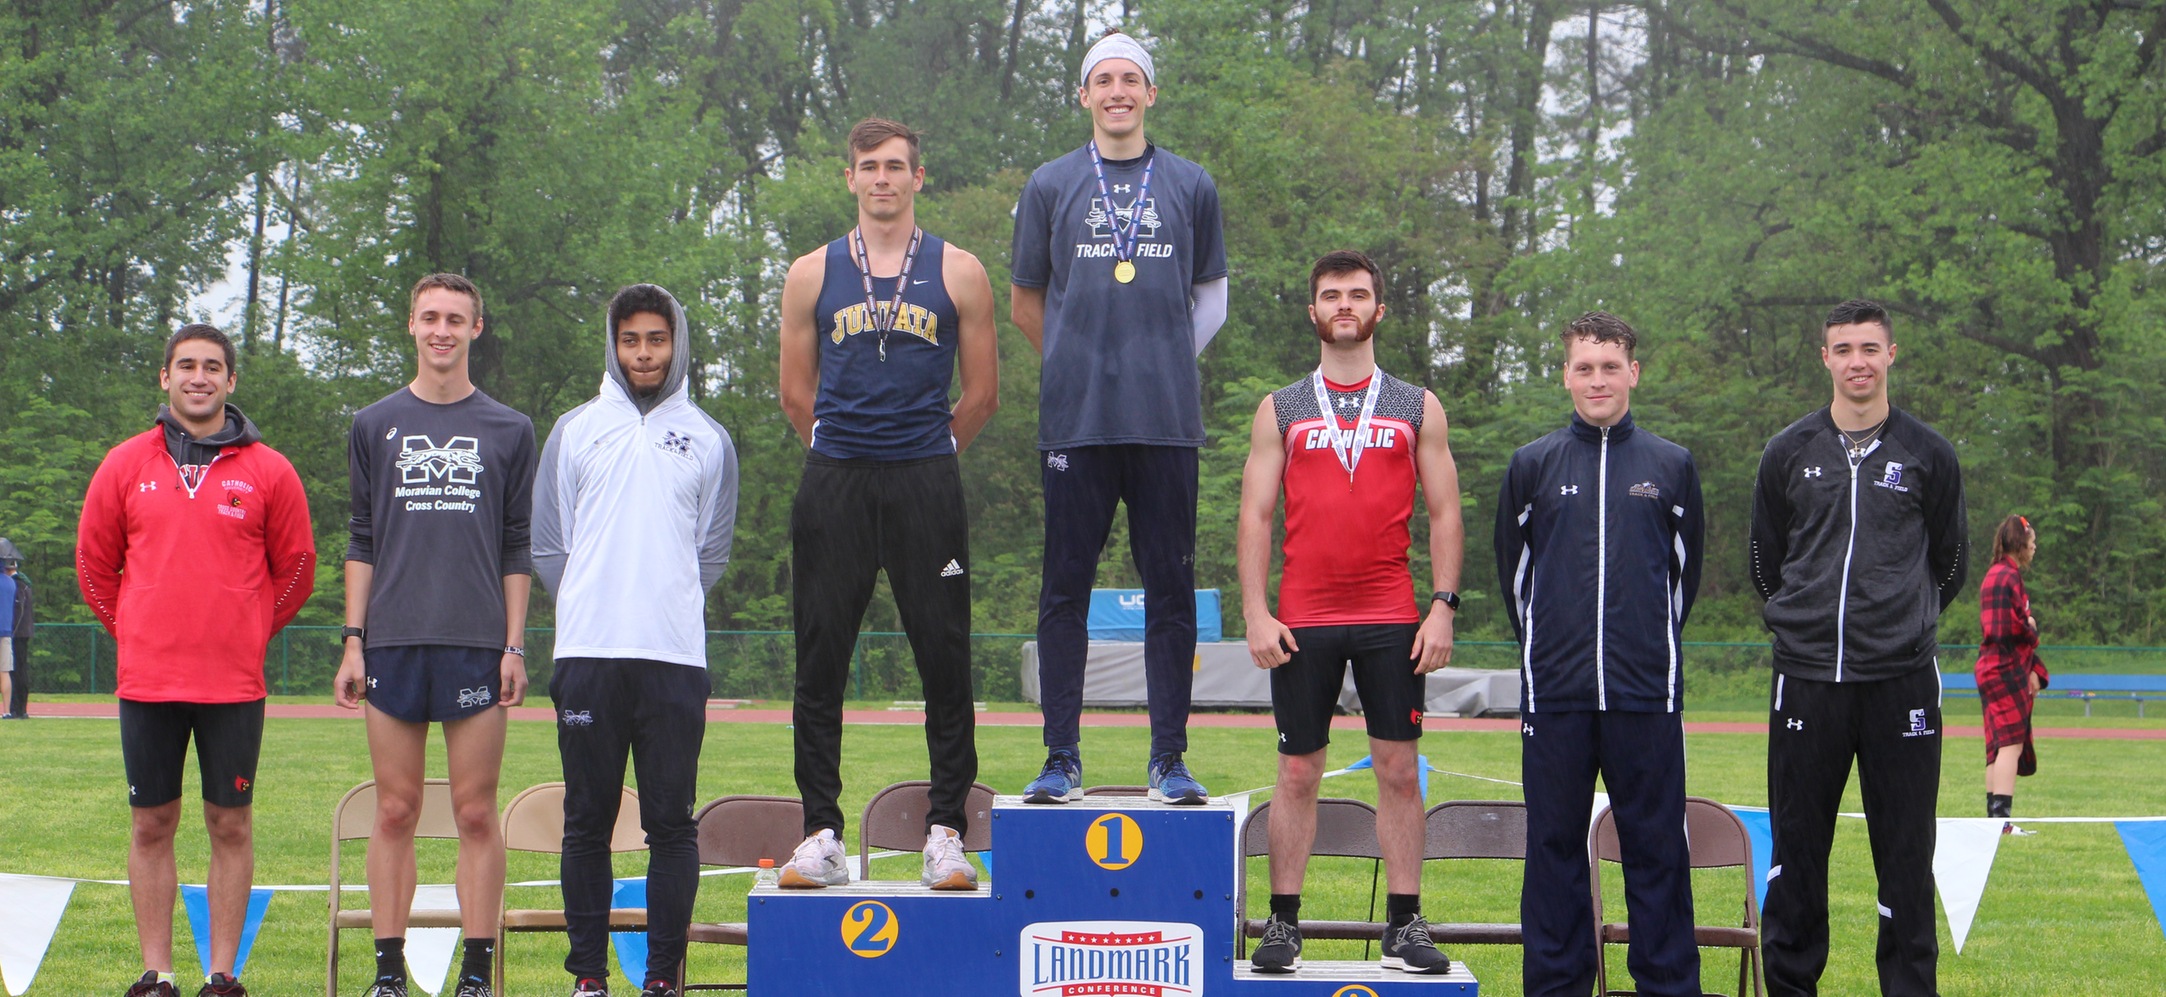 Brenden Gardner placed 2nd while Malcolm MacDermid placed fifth in the 400m hurdles.